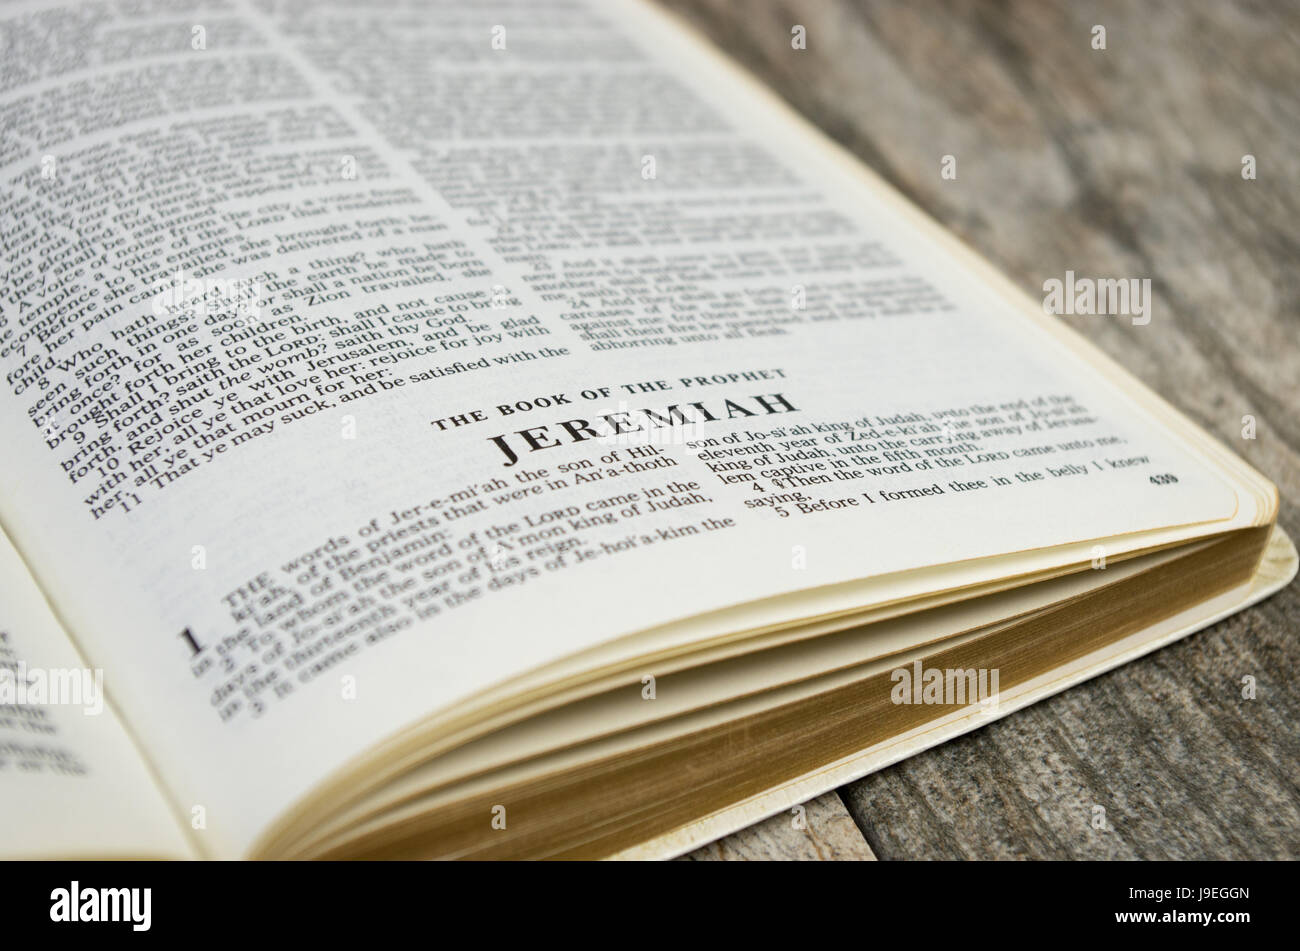 Title page for the book of Jeremiah in the Bible – King James Version Stock Photo